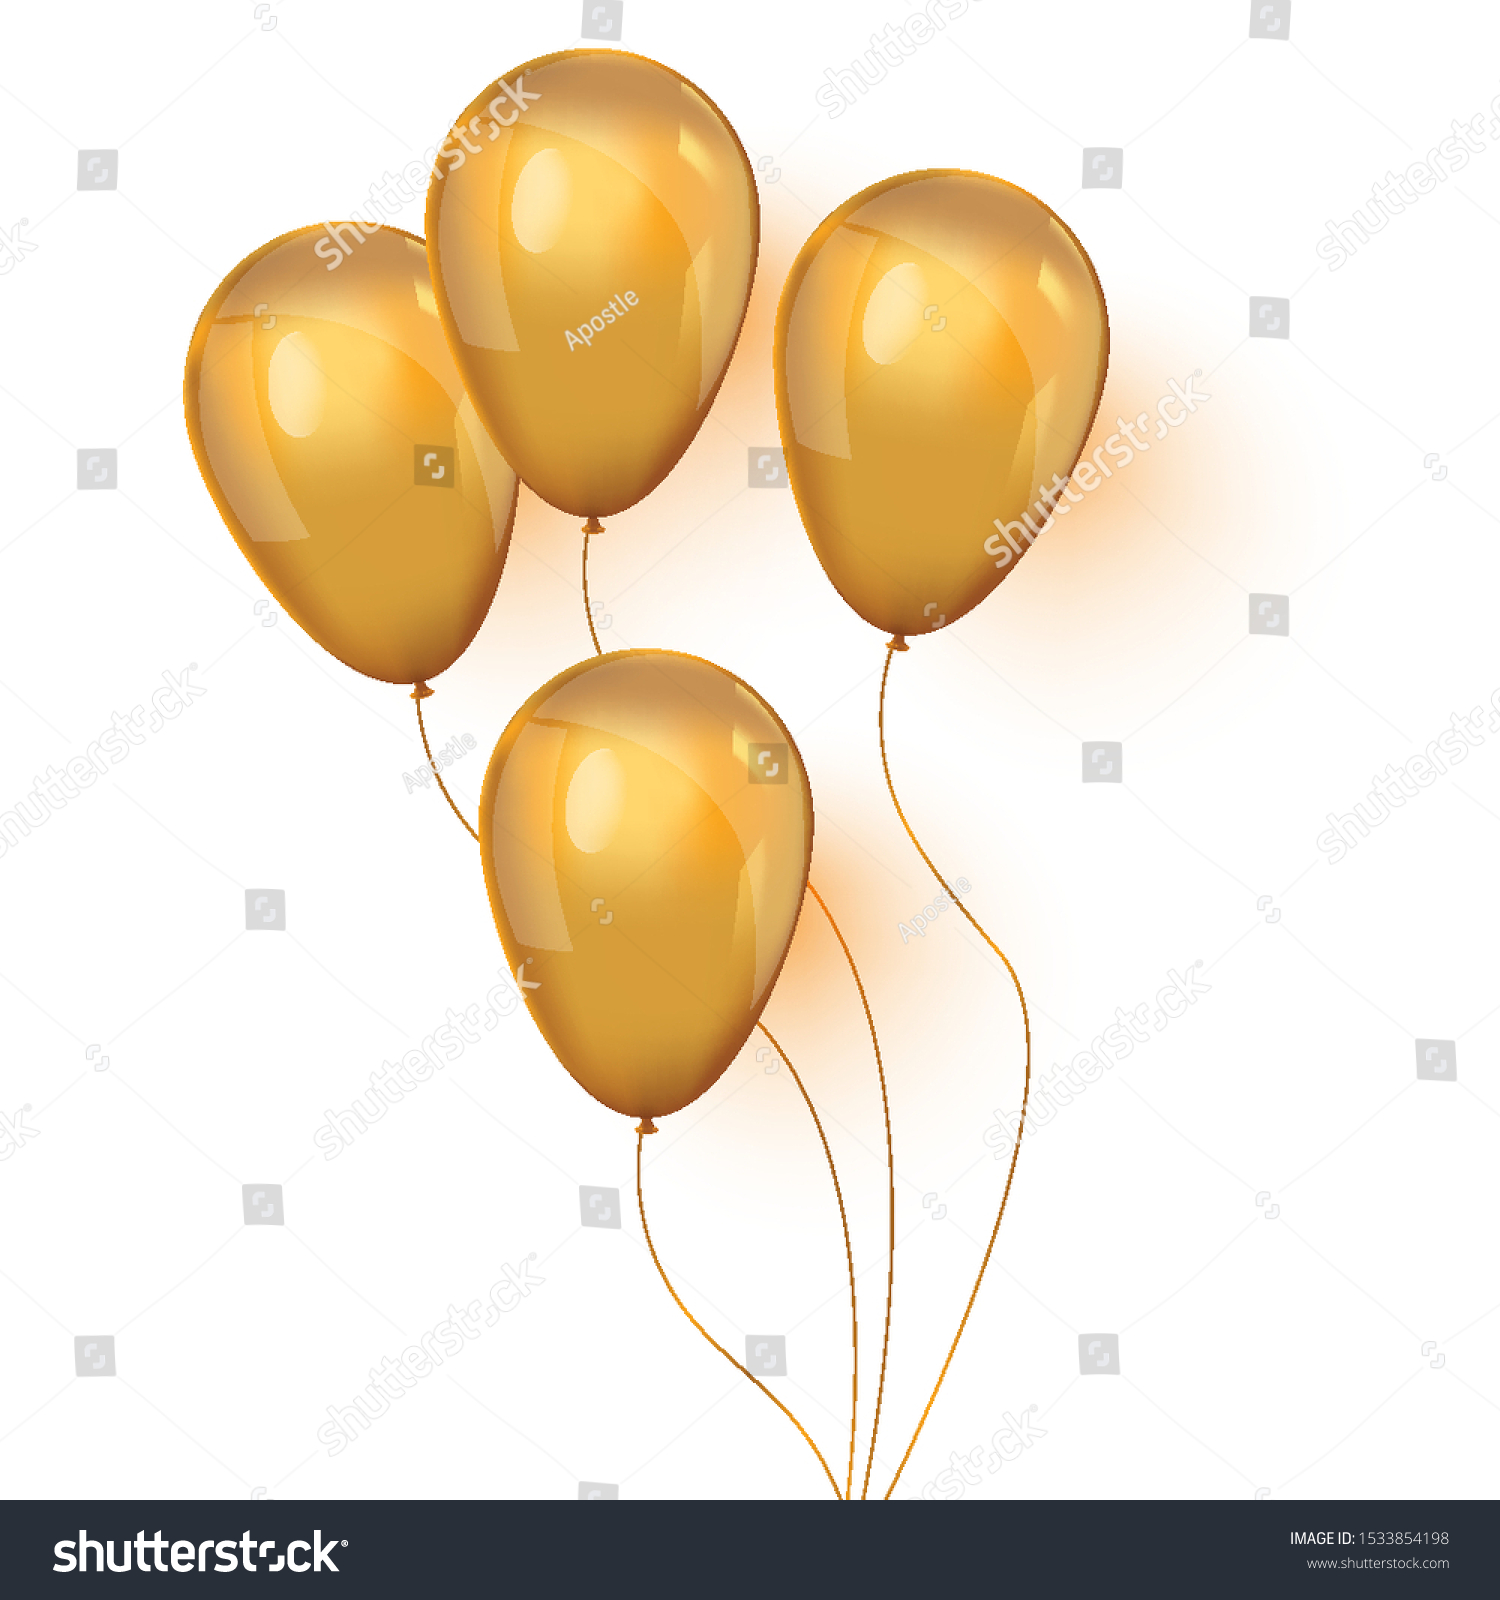 Realistic 3D Gold helium balloons on white background. Set of shiny golden balloons for your design. Glossy gold festive 3d helium ballons.